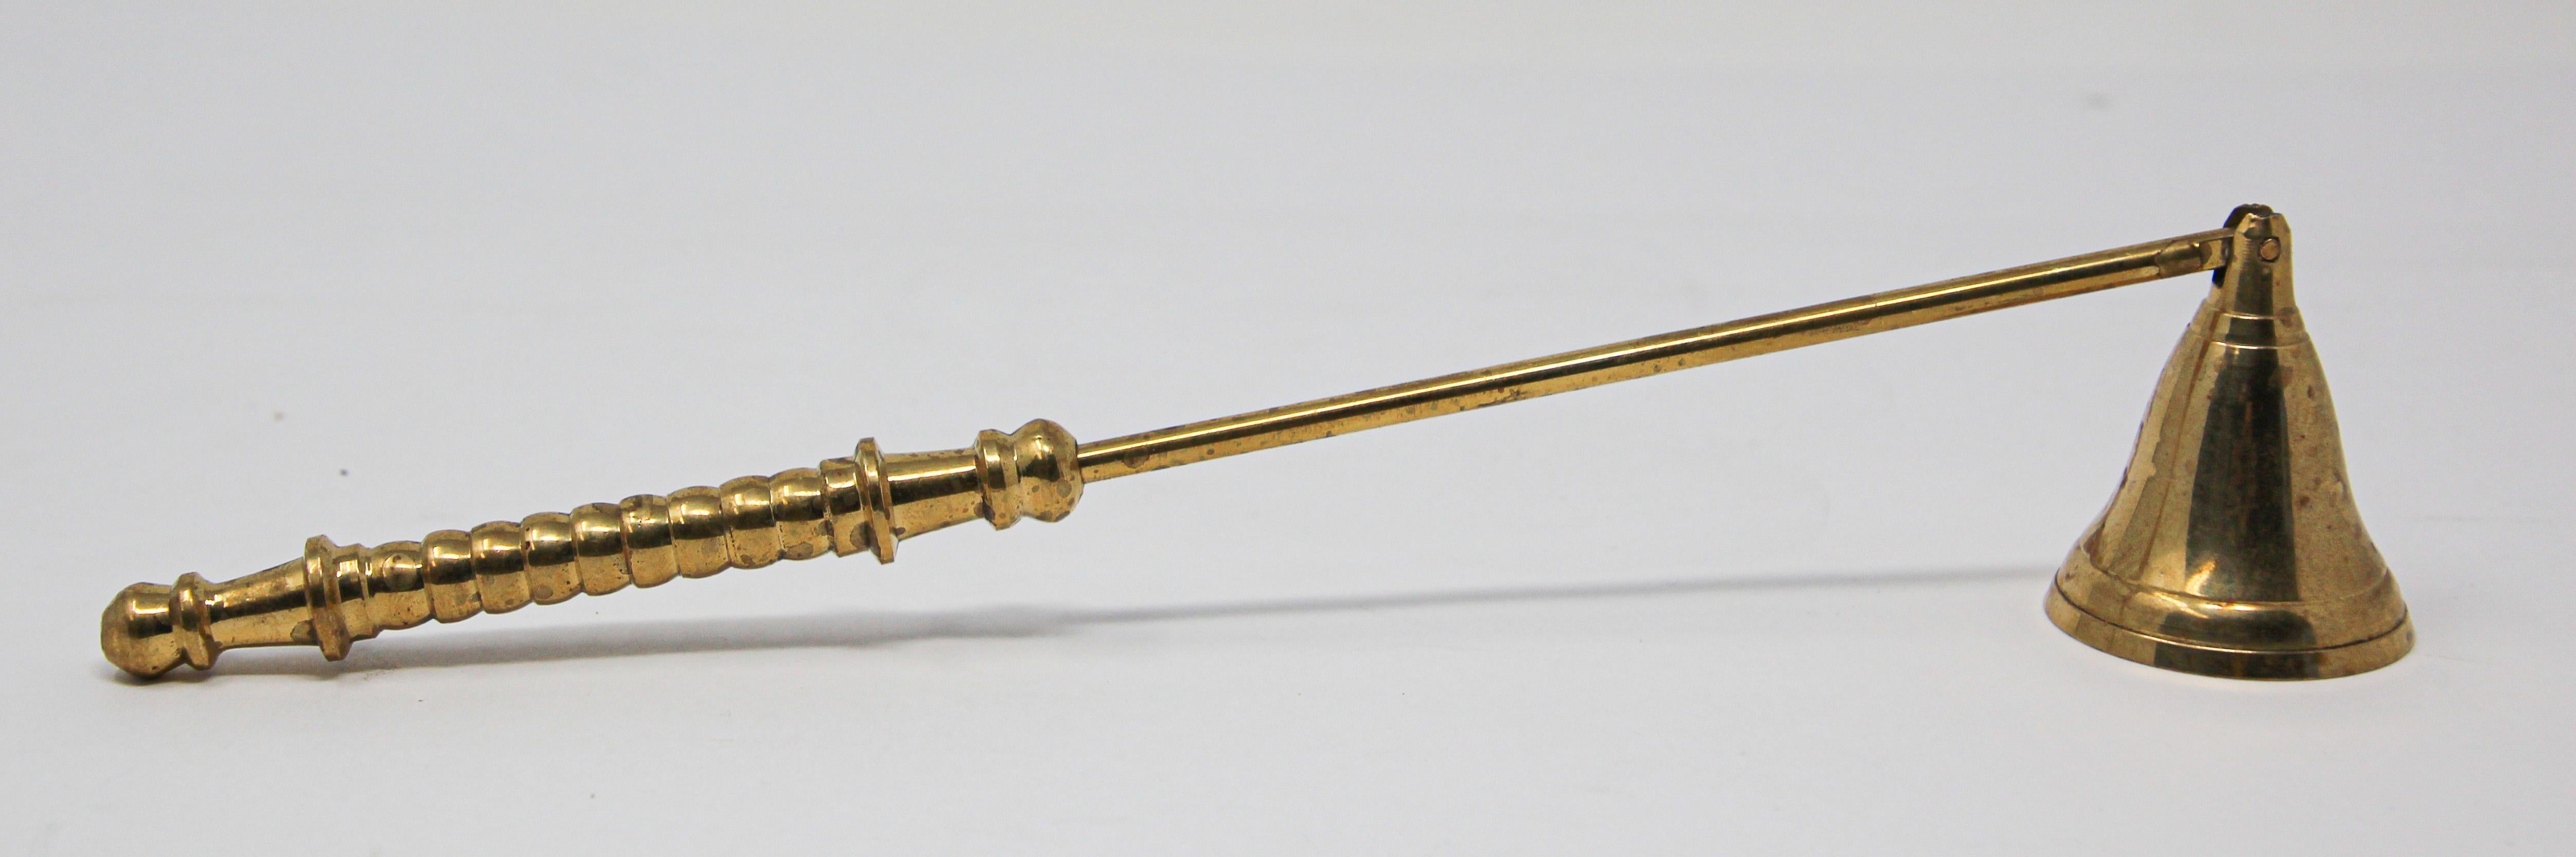 Vintage Anglo-Indian style polished brass candle snuffer.
Articulated arm candle snuffer with Victorian details on the brass grip handle.
Conical shape snuffer with ribbed arm and rounded handle.
Size: 10” L x 1.75” H x 1.5” D.
Handcrafted in